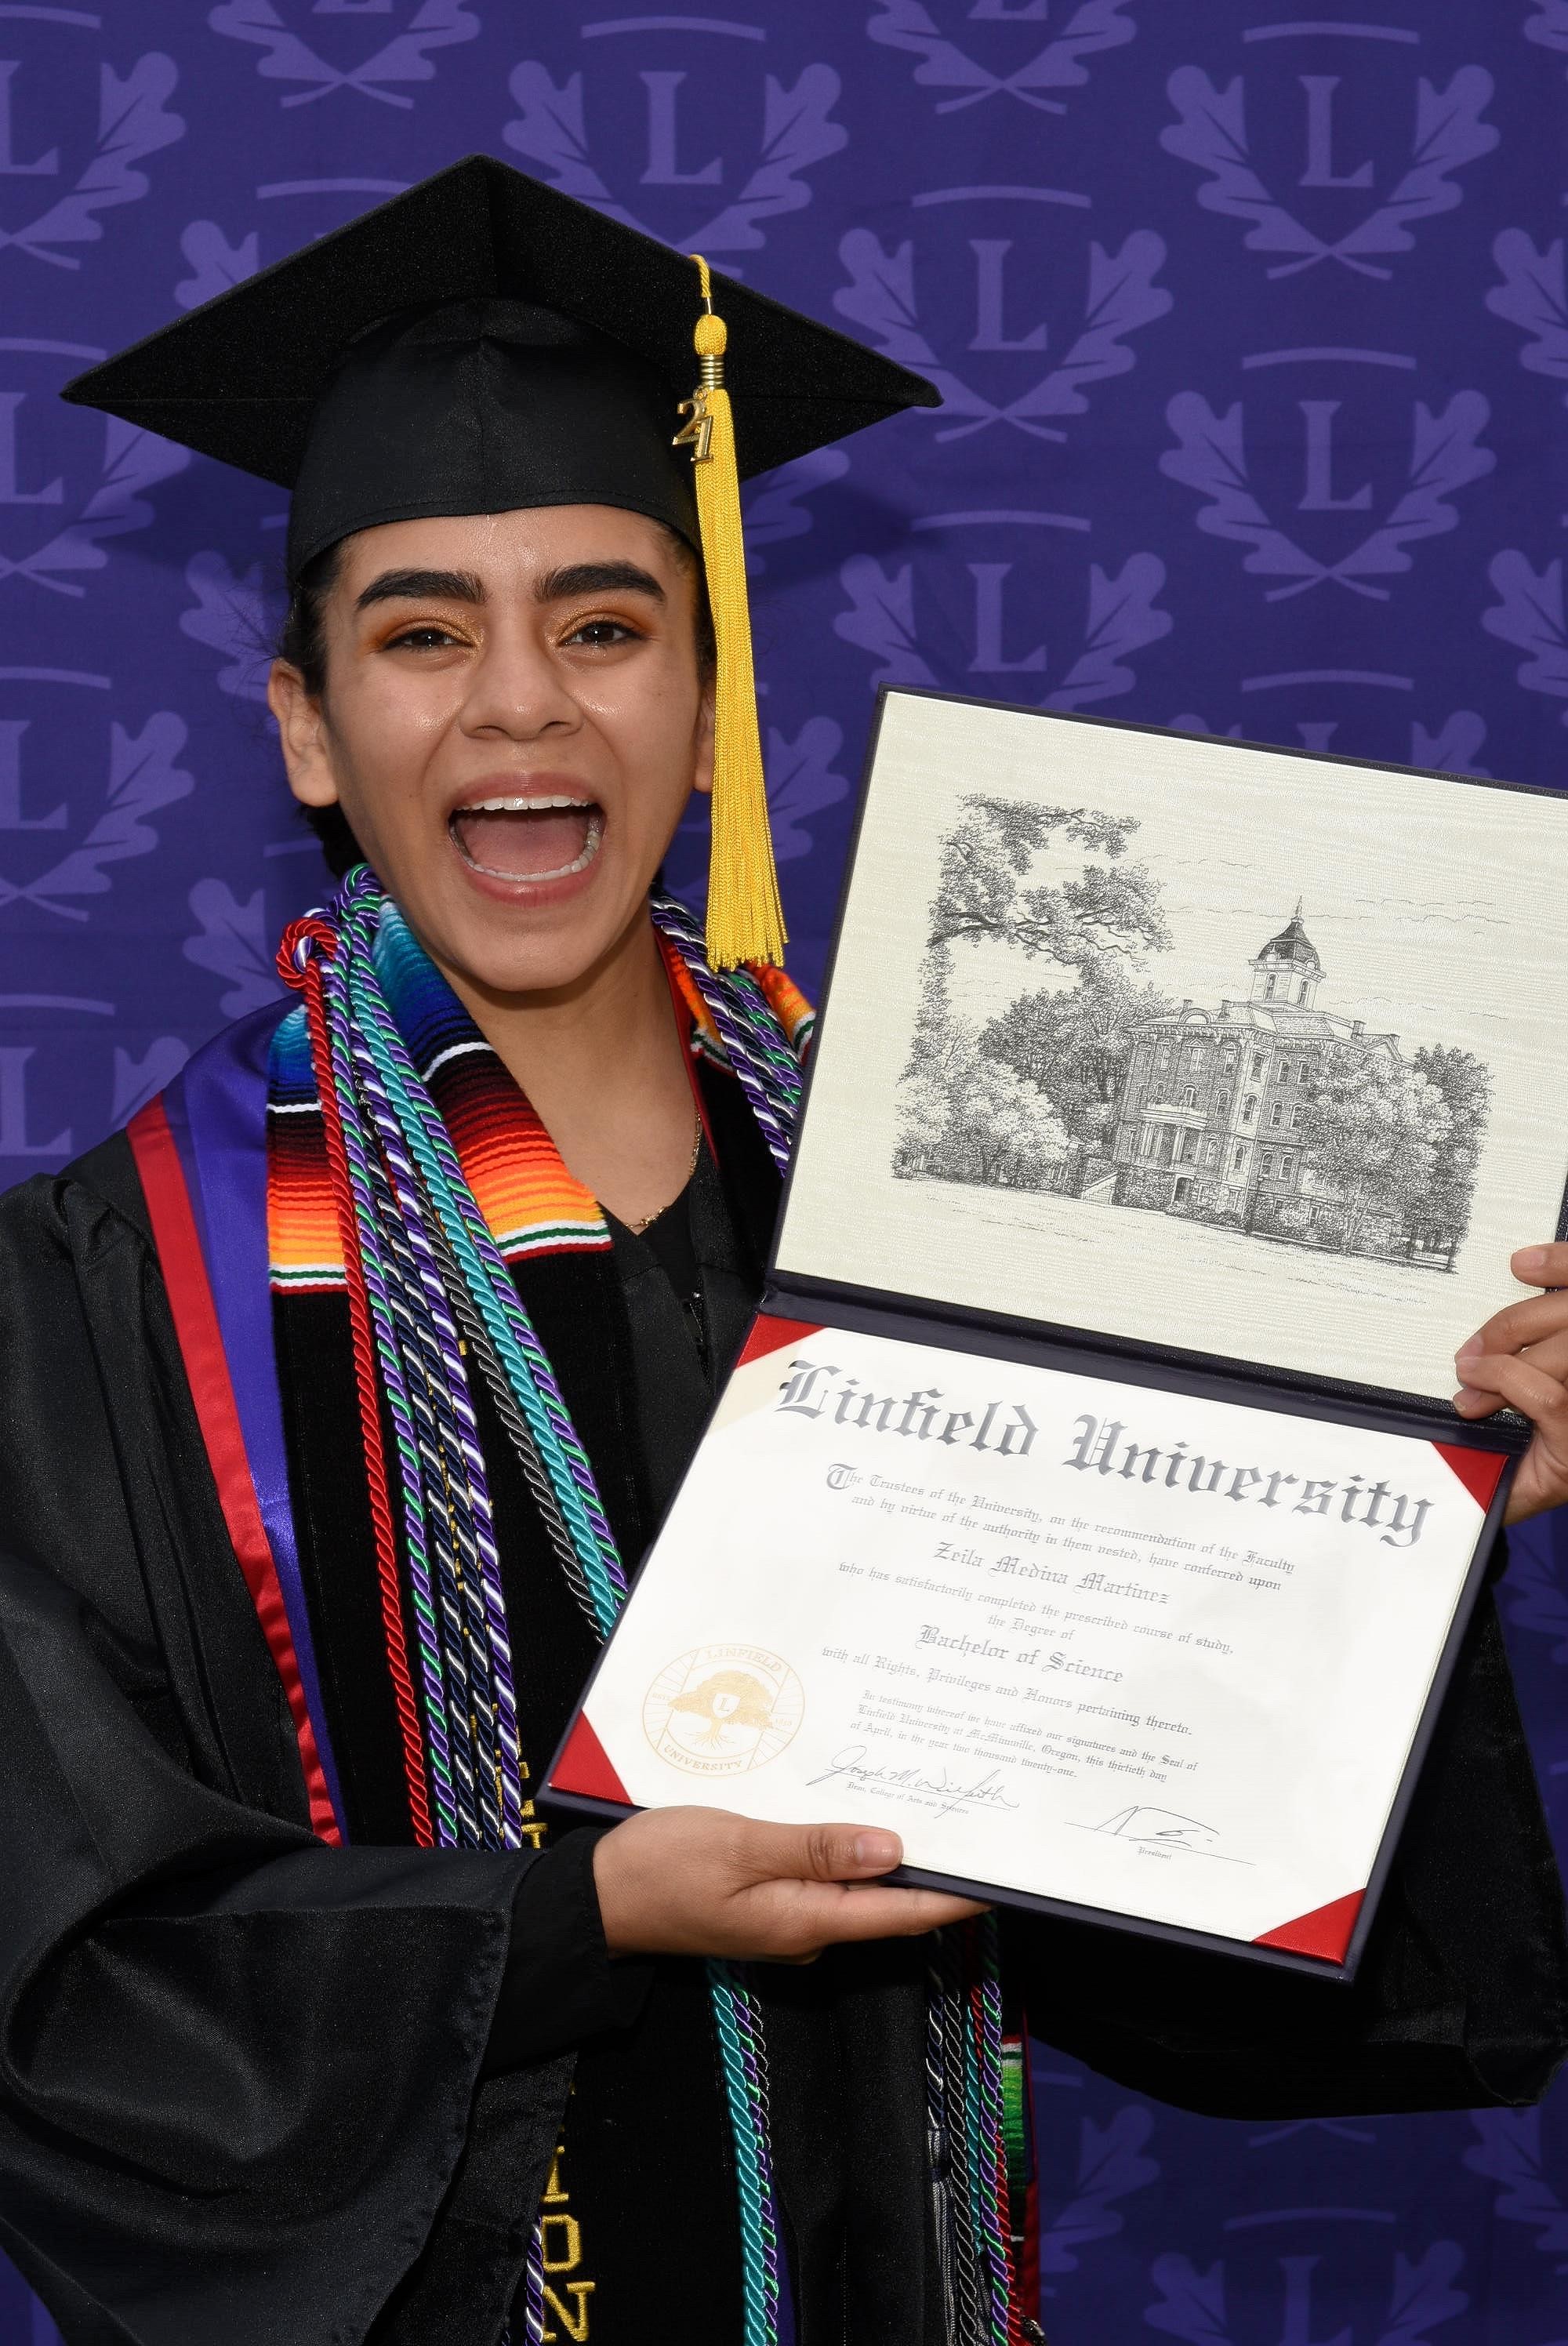 Zeila has a big smile on her face while displaying her Linfield diploma